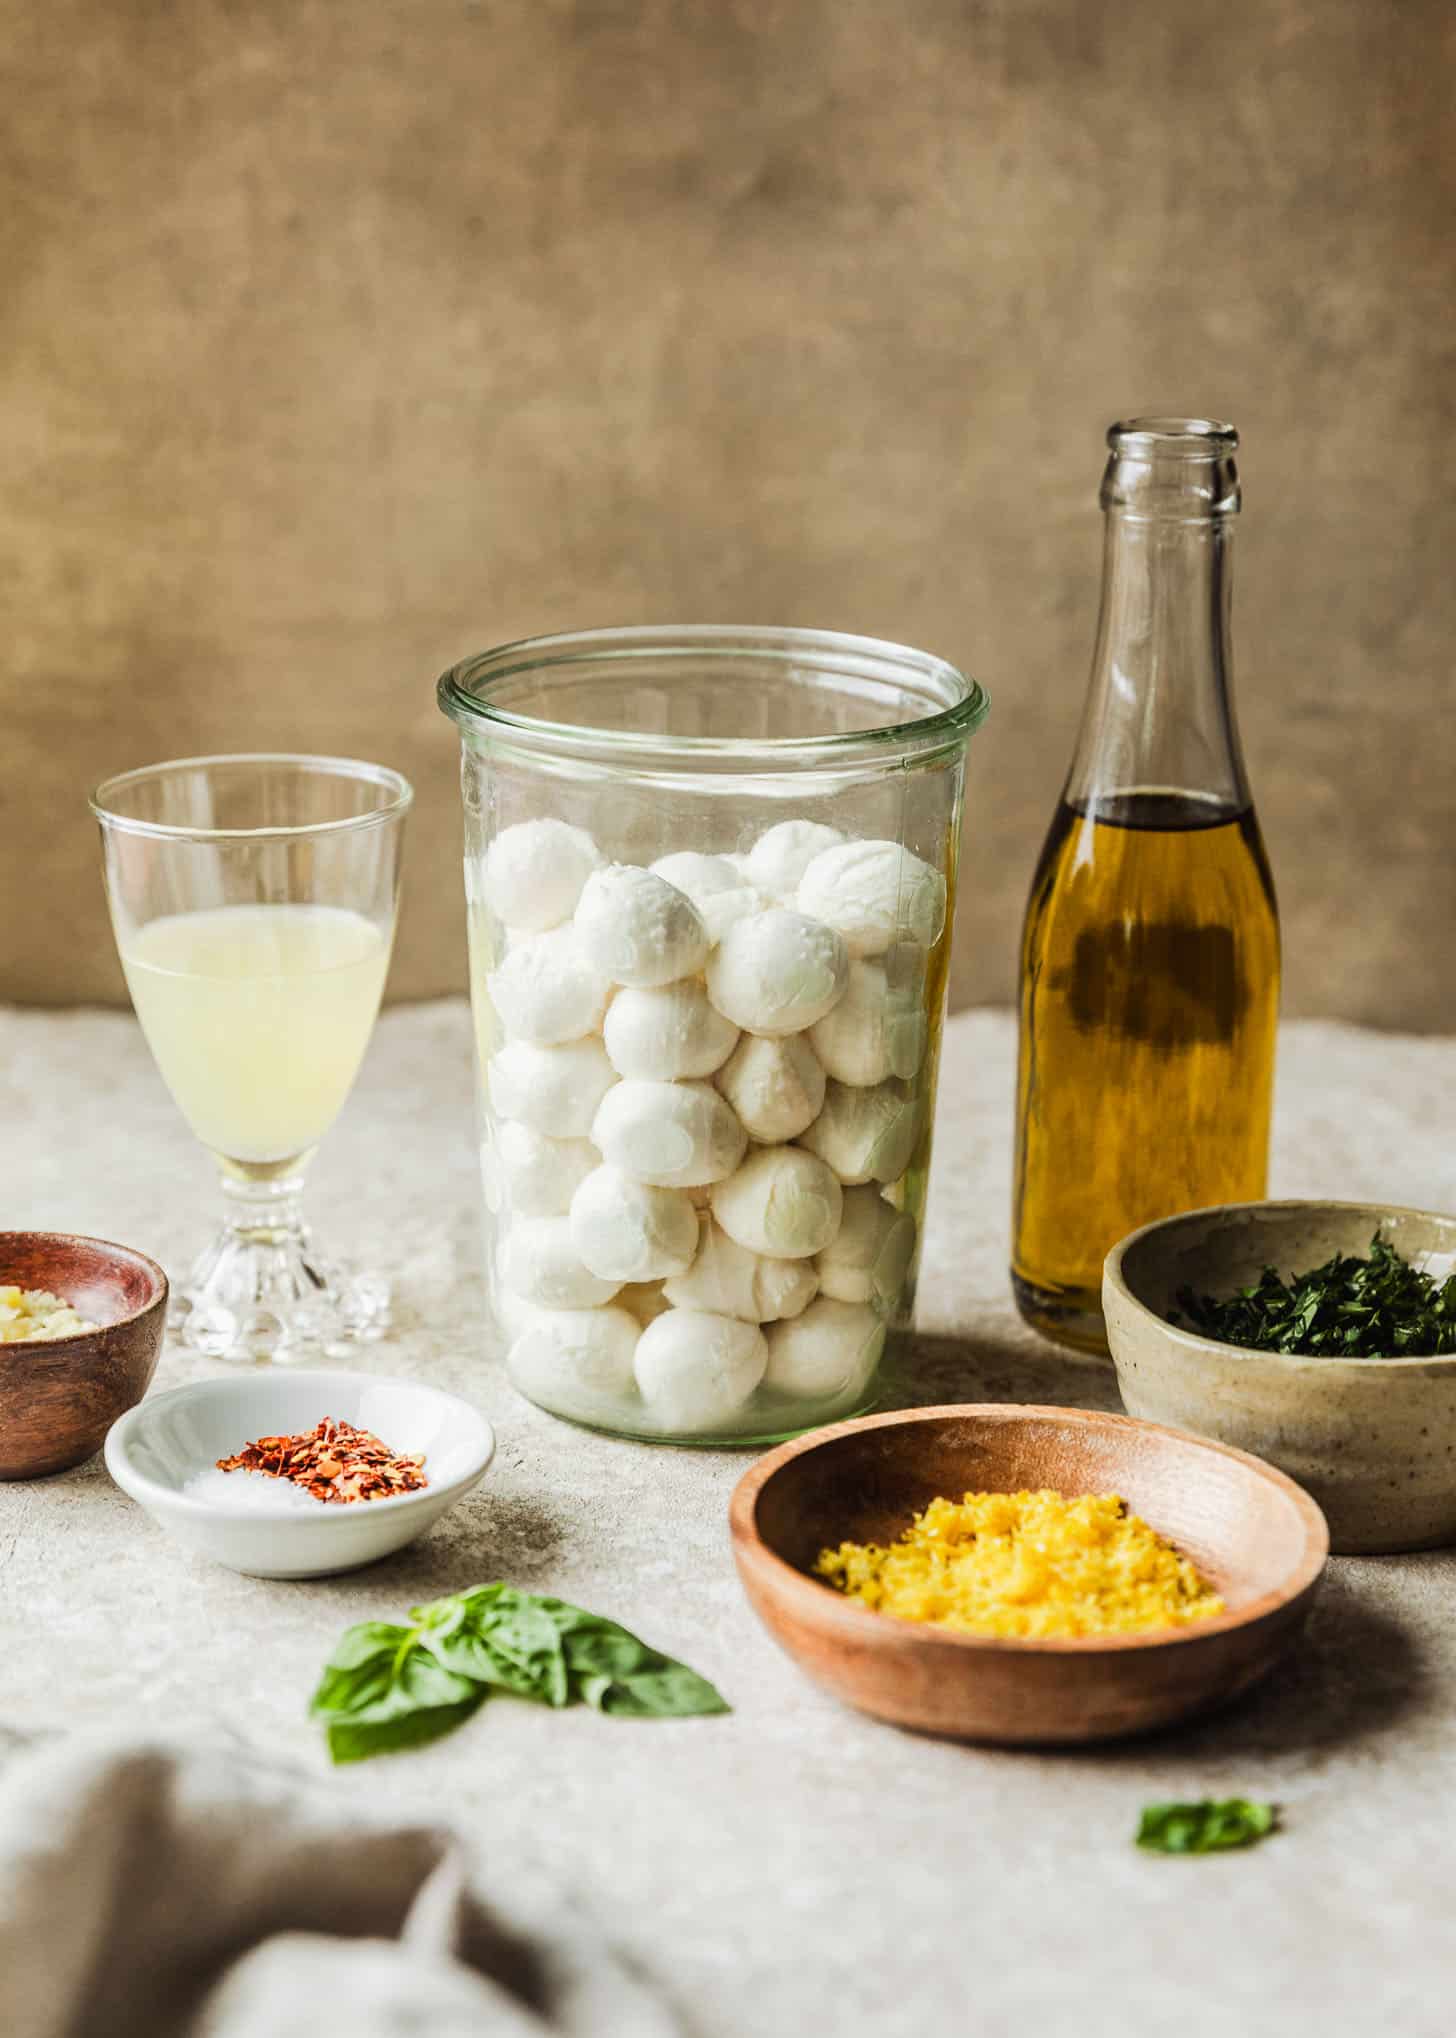 Glass jars of mozzarella pearls, olive oil, and lemon juice on a beige and brown background next to wood bowls of lemon zest and garlic, basil, and white bowls of basil and spices.